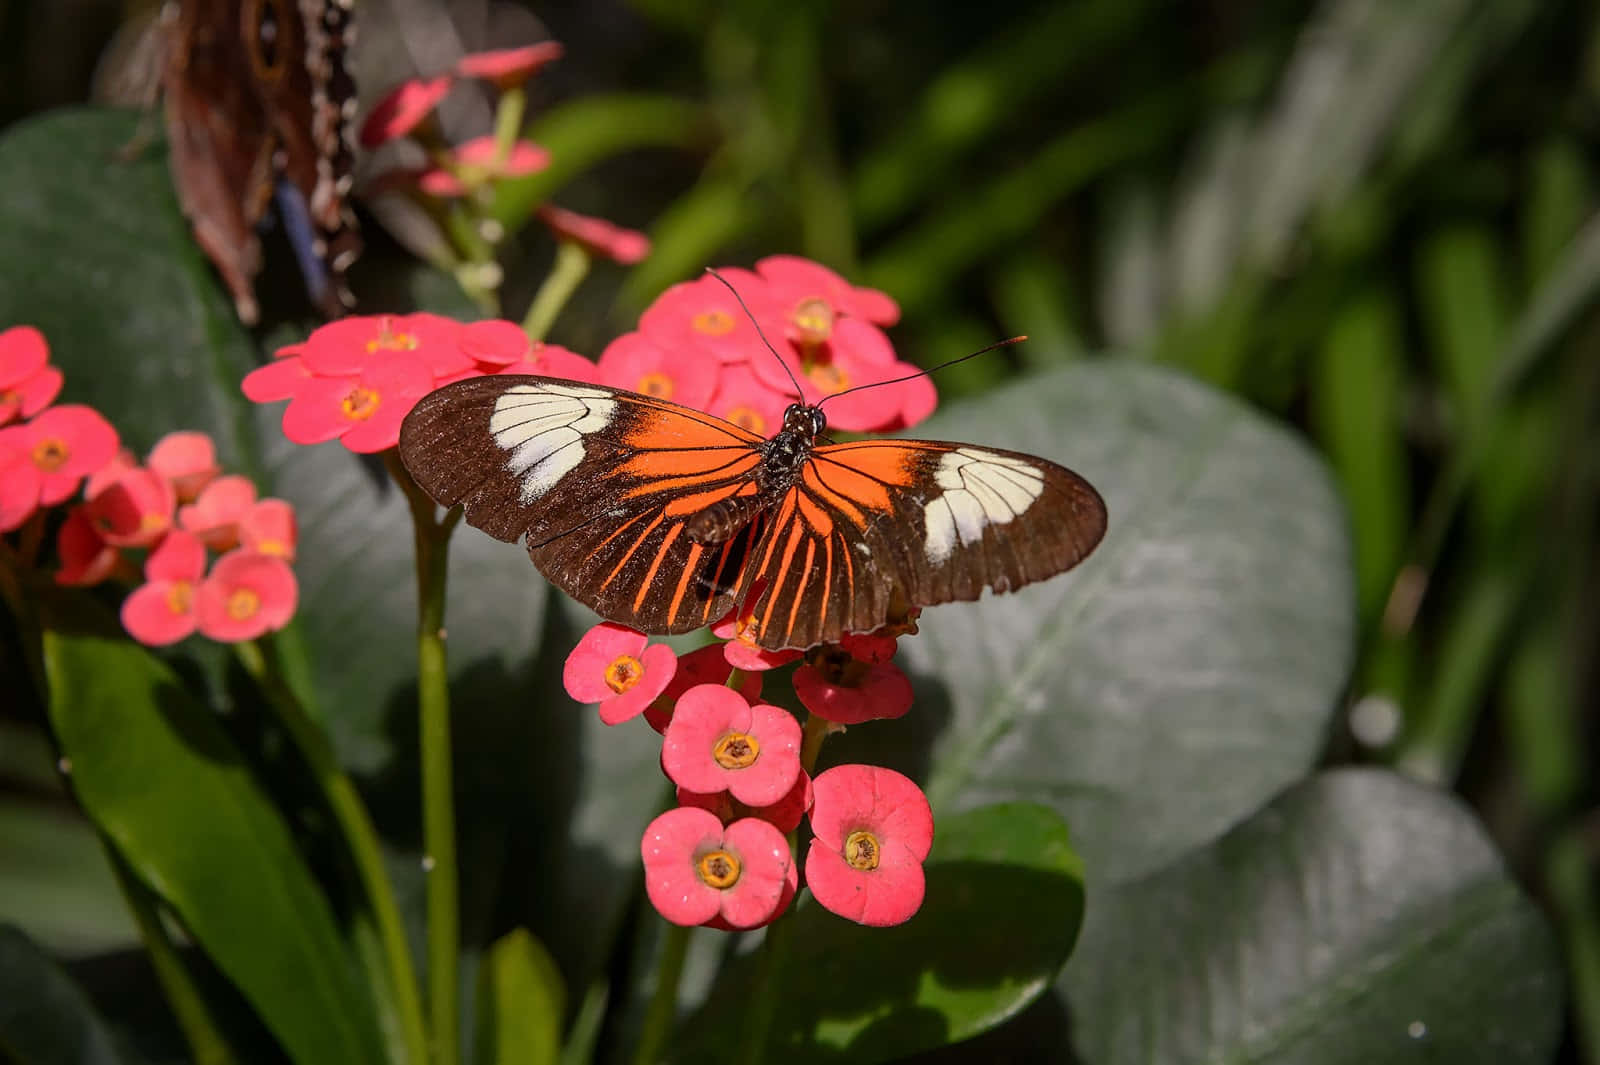 Visit the Butterfly Zoo to observe beautiful and diverse species of butterflies. Wallpaper